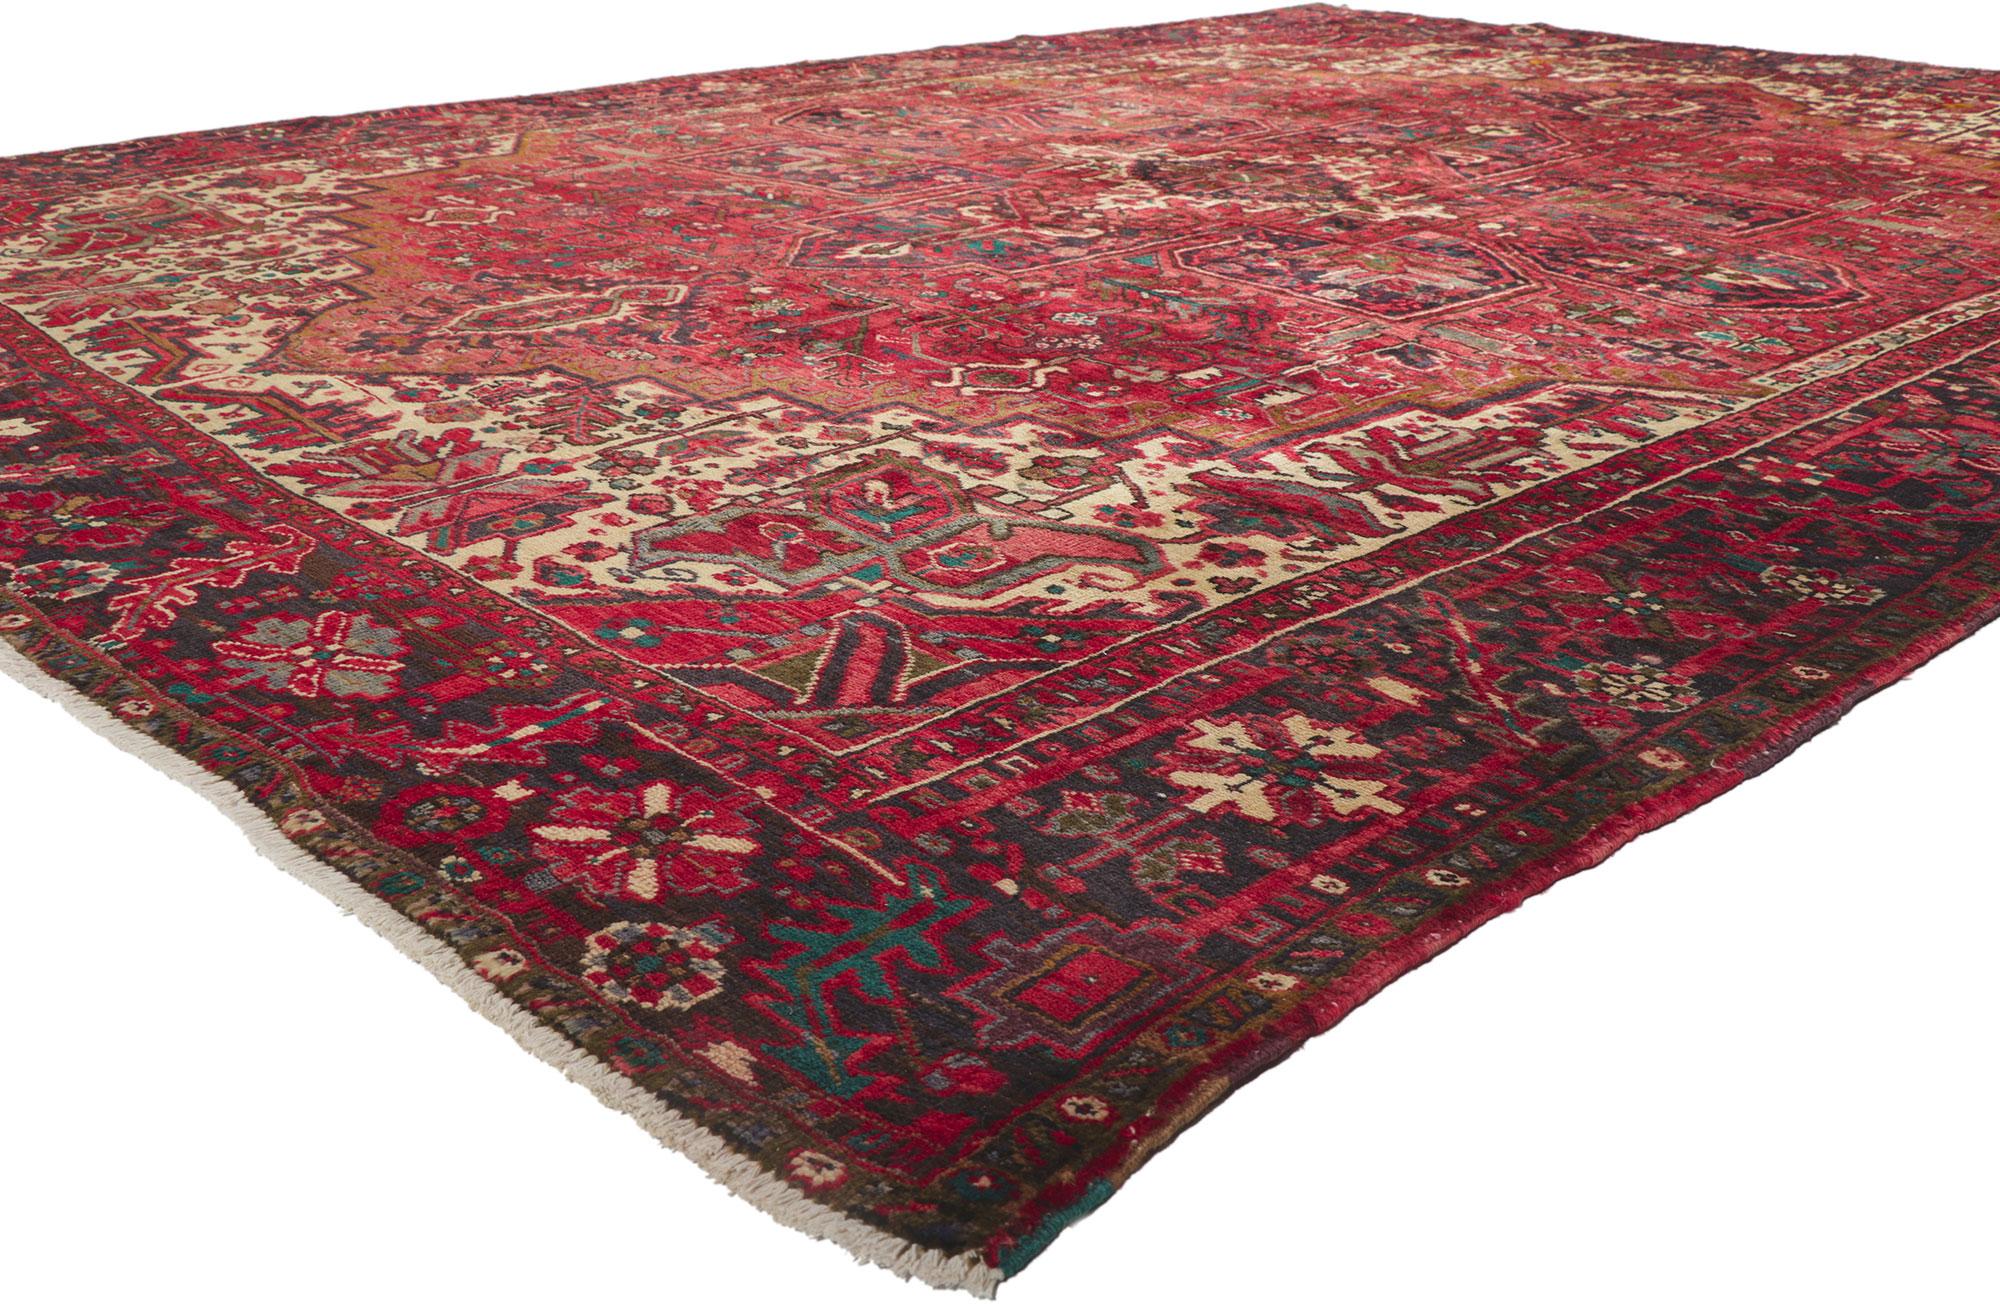 61191 vintage Persian Heriz rug, 10'02 x 13'04.
With its timeless style, incredible detail and texture, this hand knotted wool vintage Persian Heriz rug is a captivating vision of woven beauty. The sophisticated design and traditional color palette